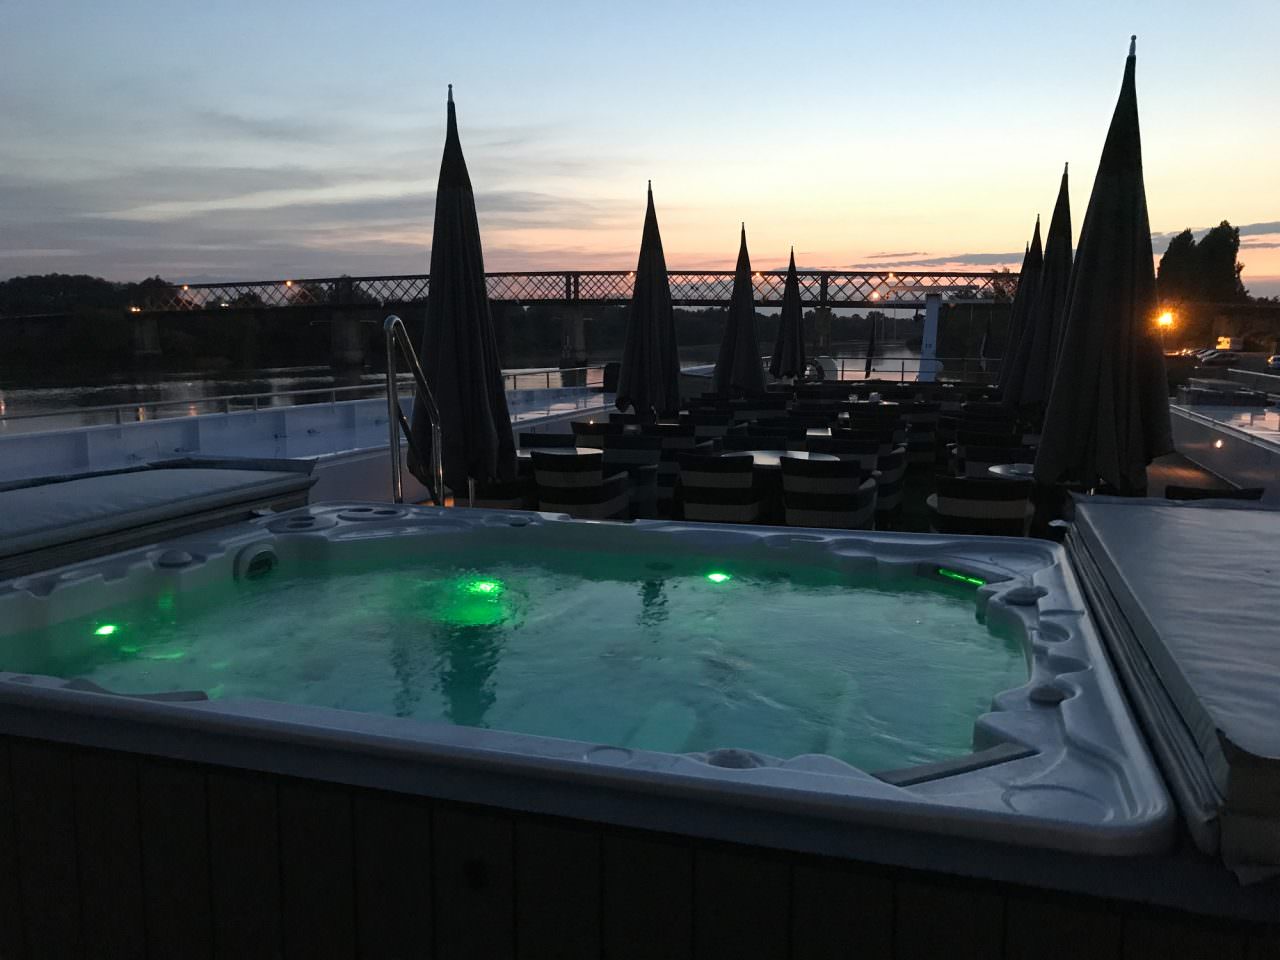 New Whirlpool On The Sundeck